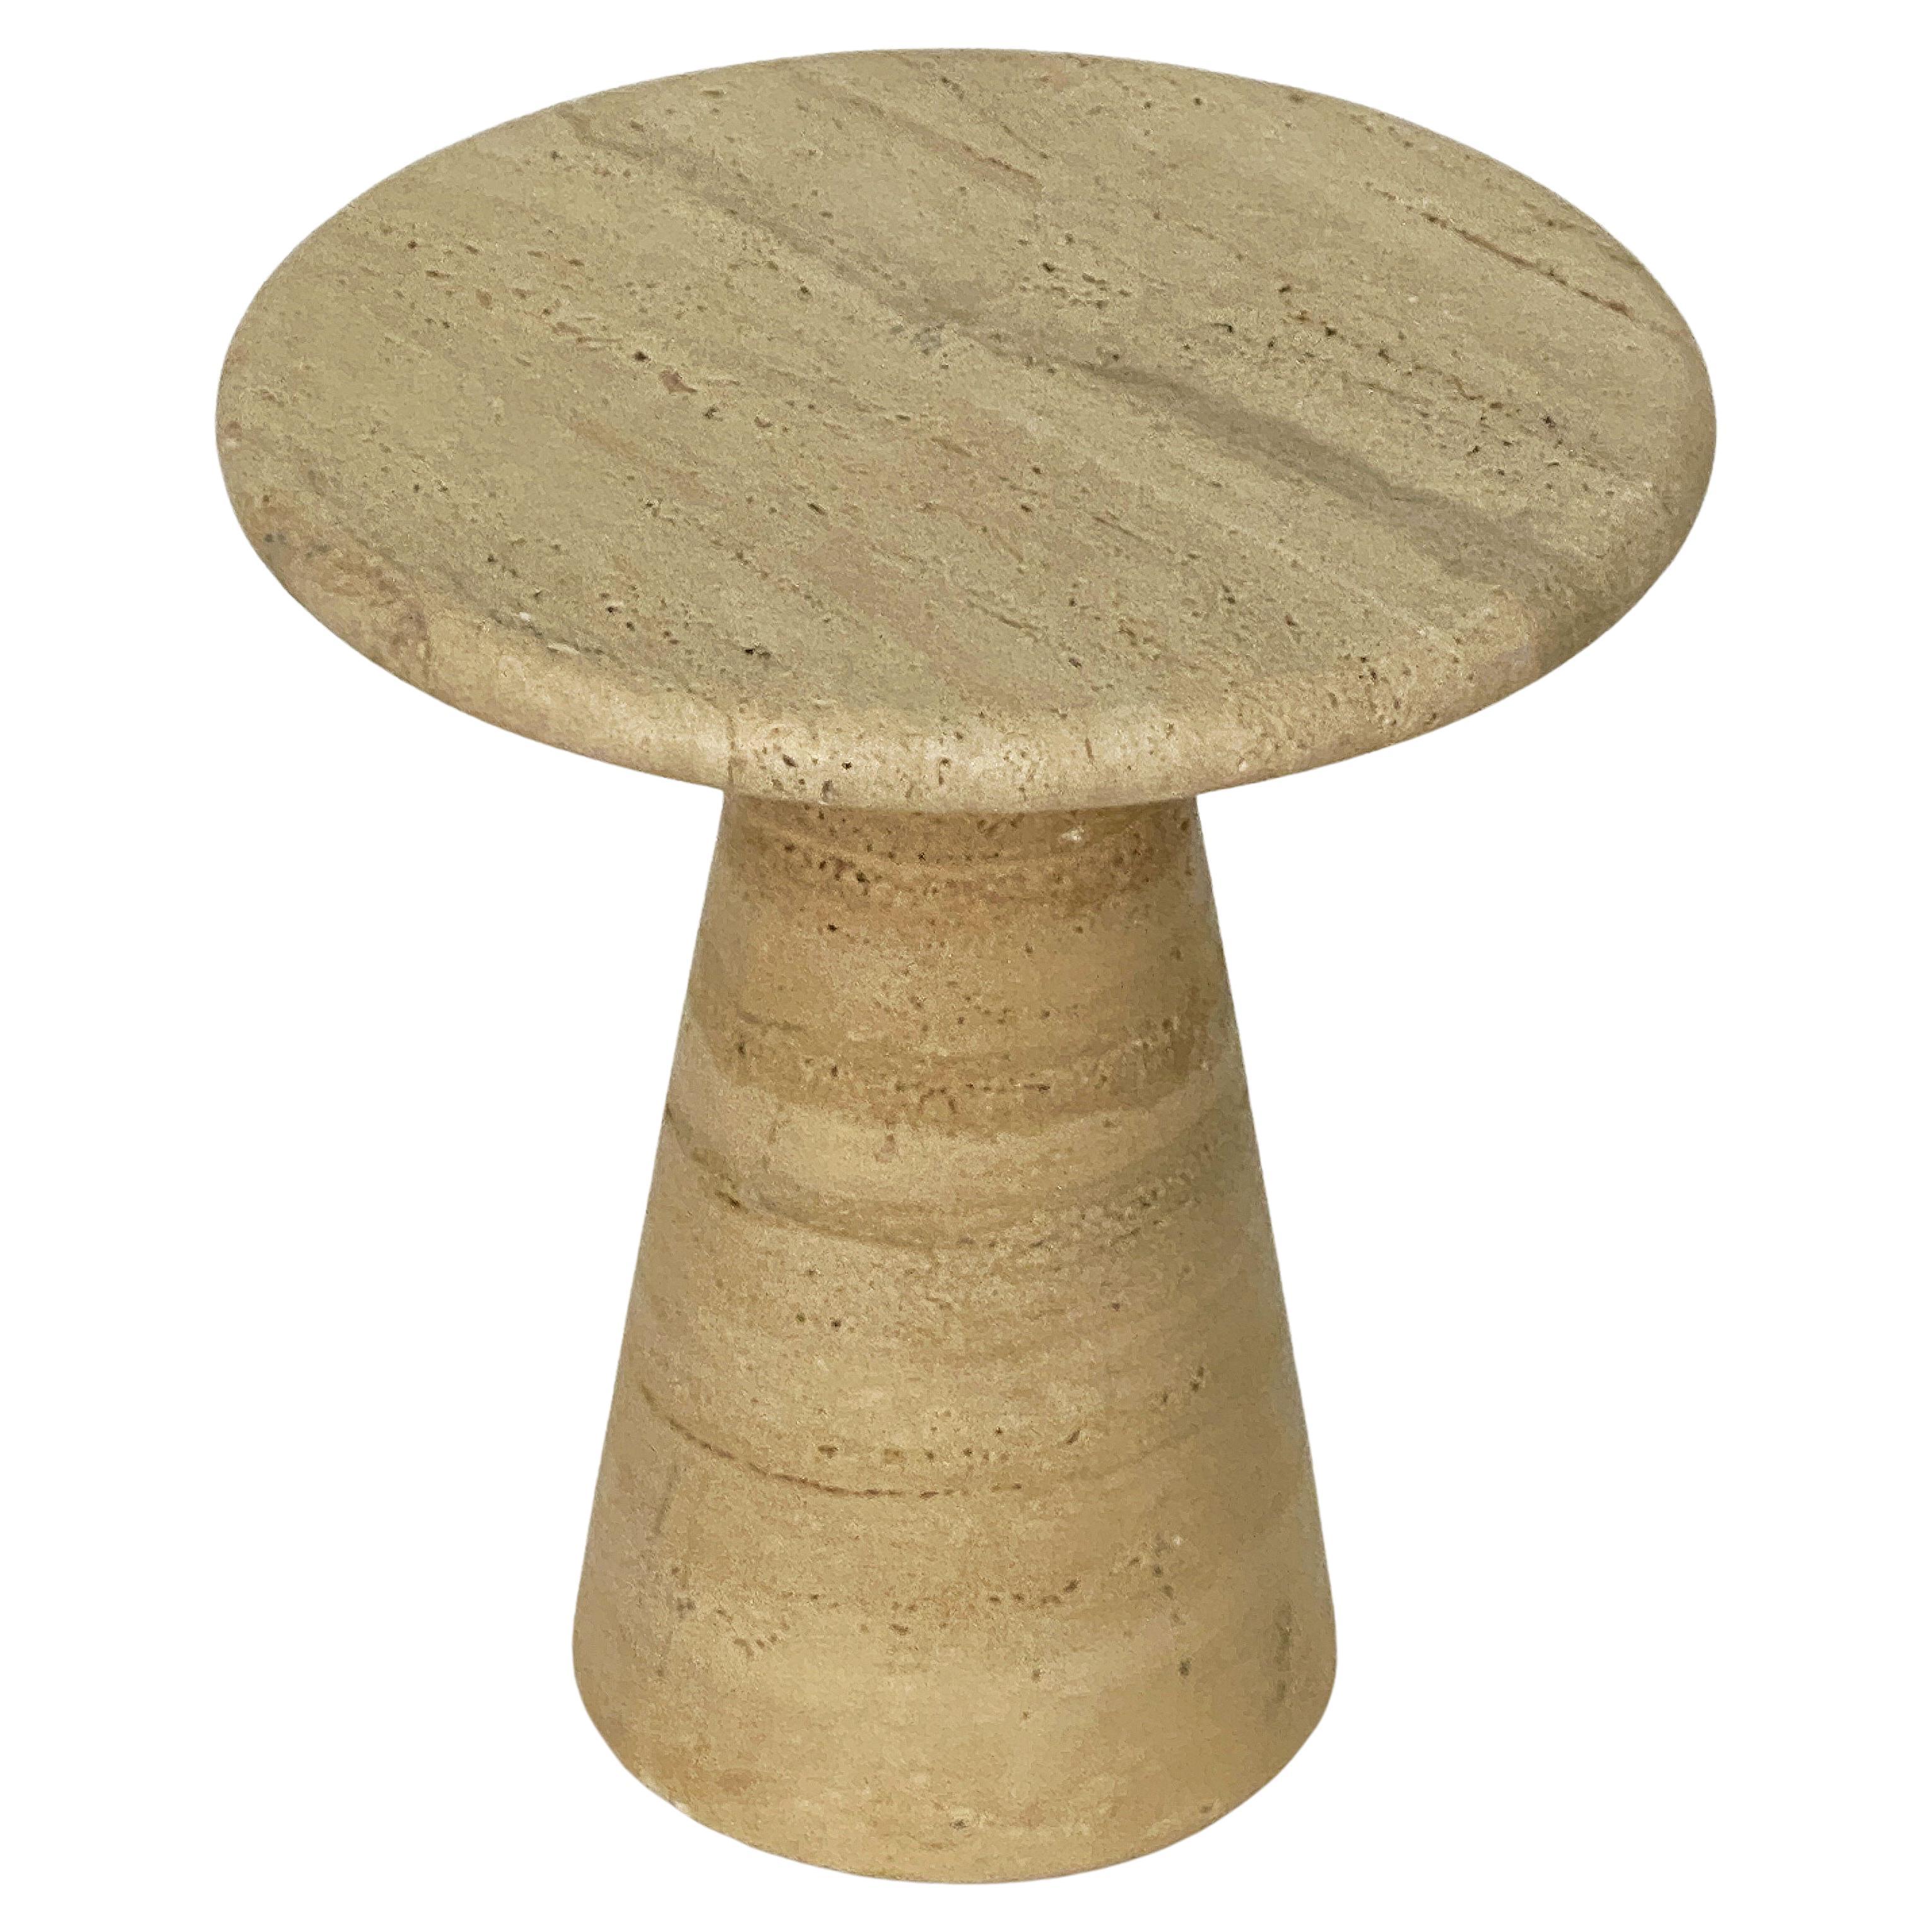 Modernist Conical Table of Travertine Stone from Italy (Four Available) For Sale